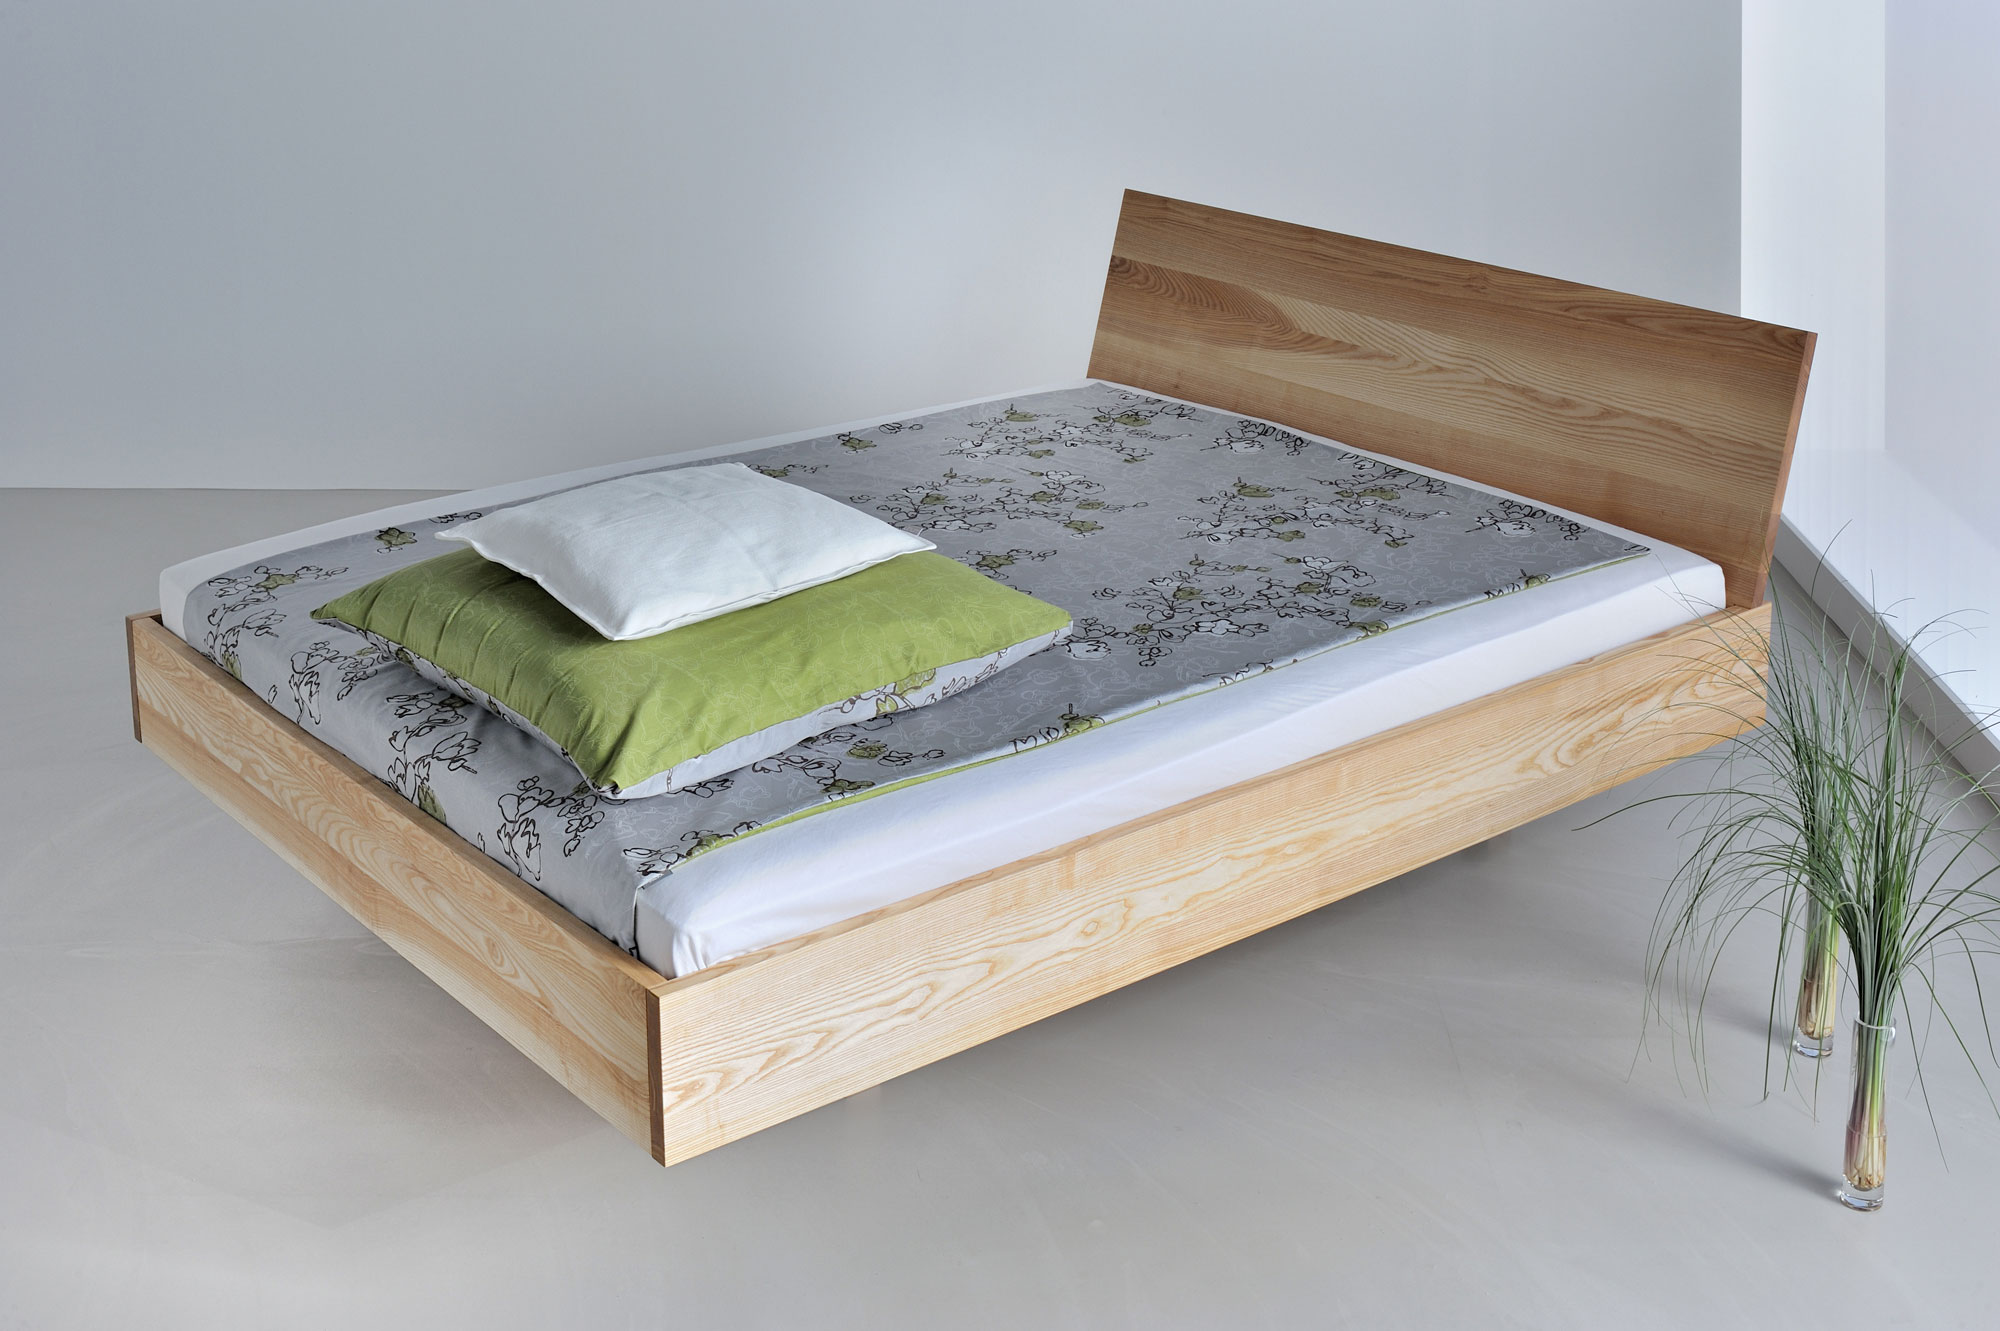 Design Bed QUADRA 23319 custom made in solid wood by vitamin design